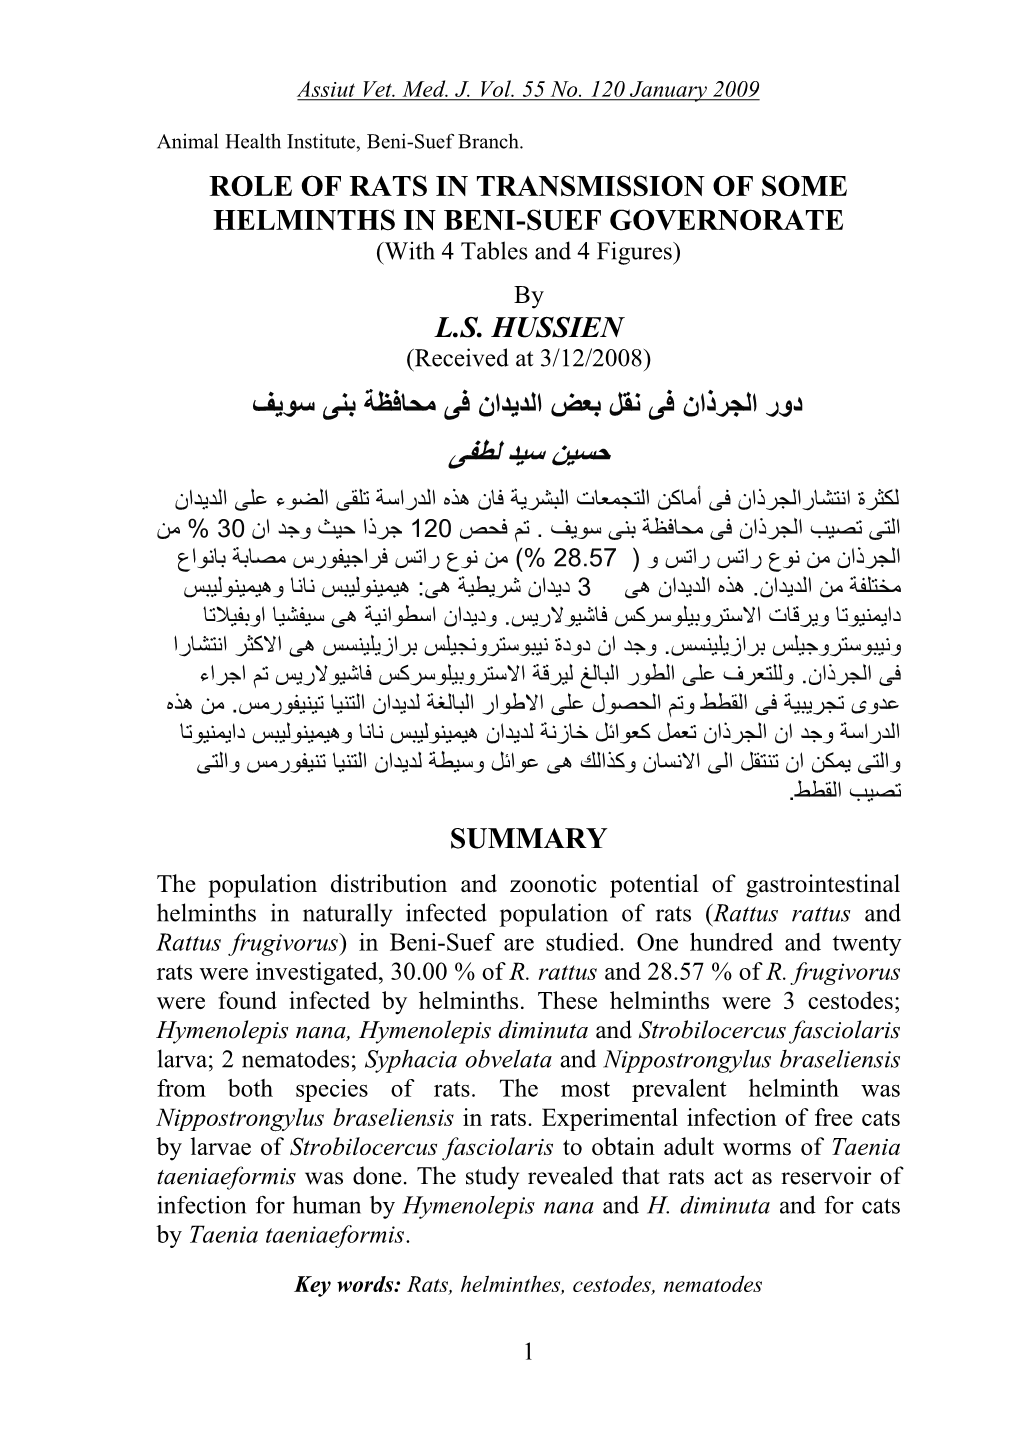 ROLE of RATS in TRANSMISSION of SOME HELMINTHS in BENI-SUEF GOVERNORATE (With 4 Tables and 4 Figures)